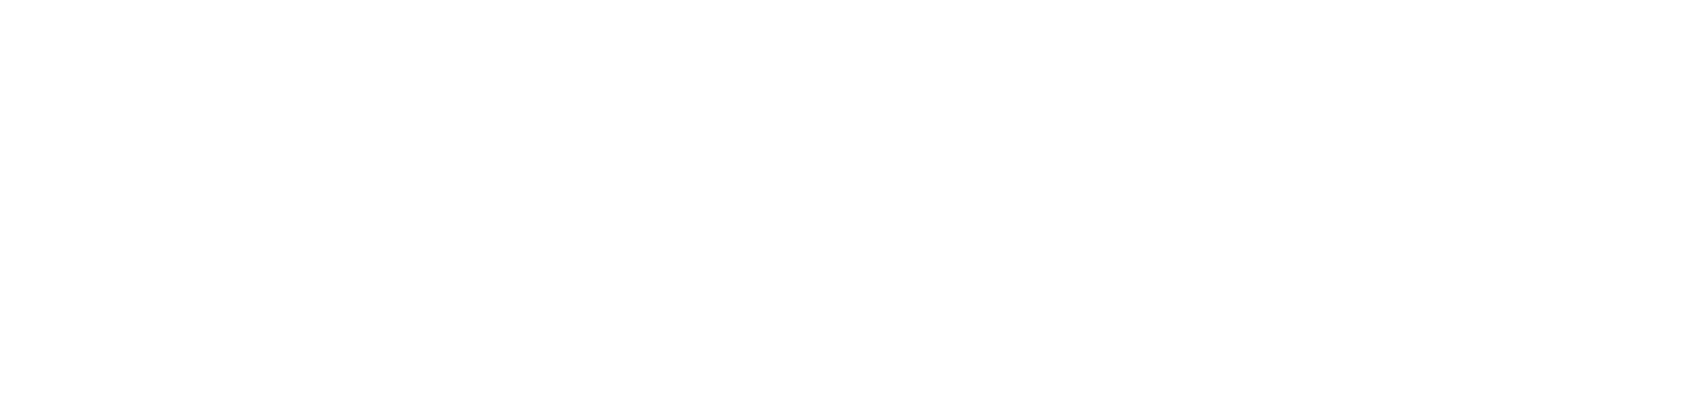 Owatonna Area Chamber Of Commerce & Tourism